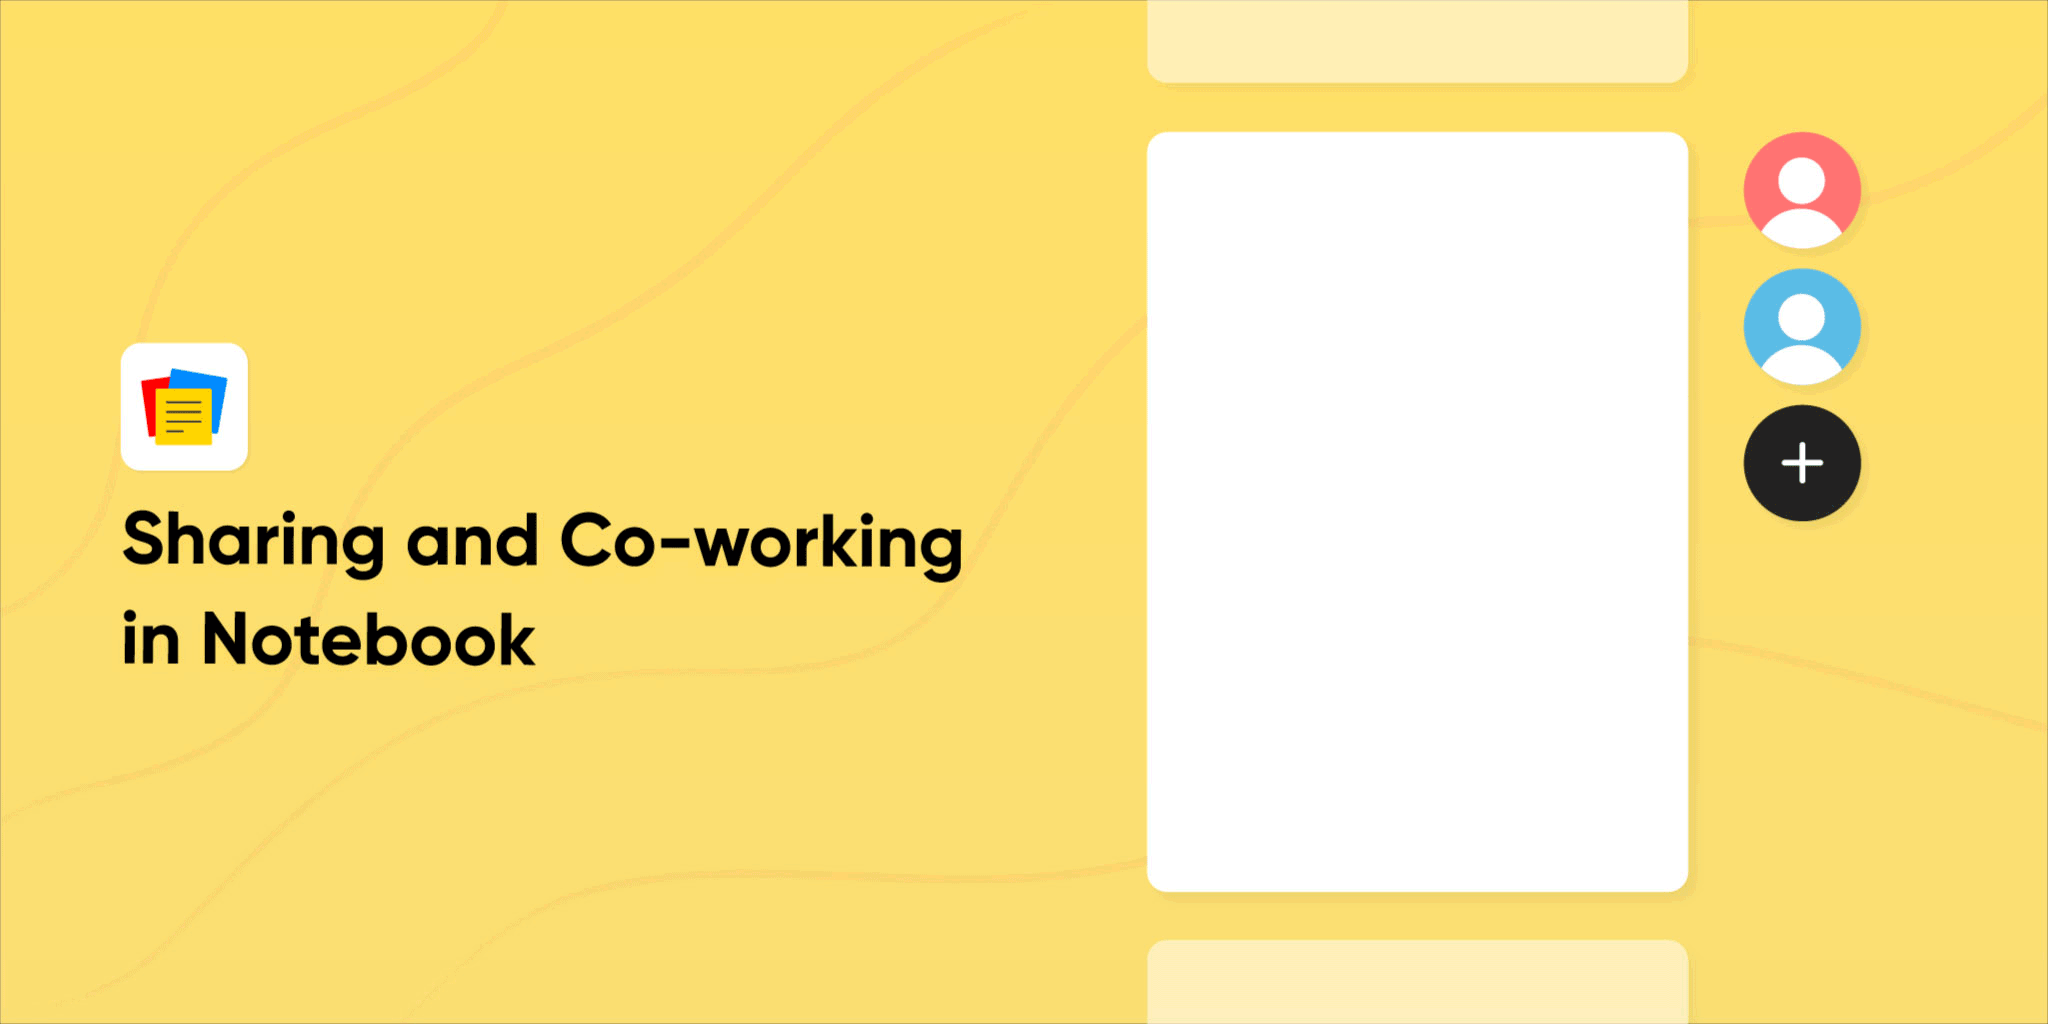 Sharing and co-working in Notebook